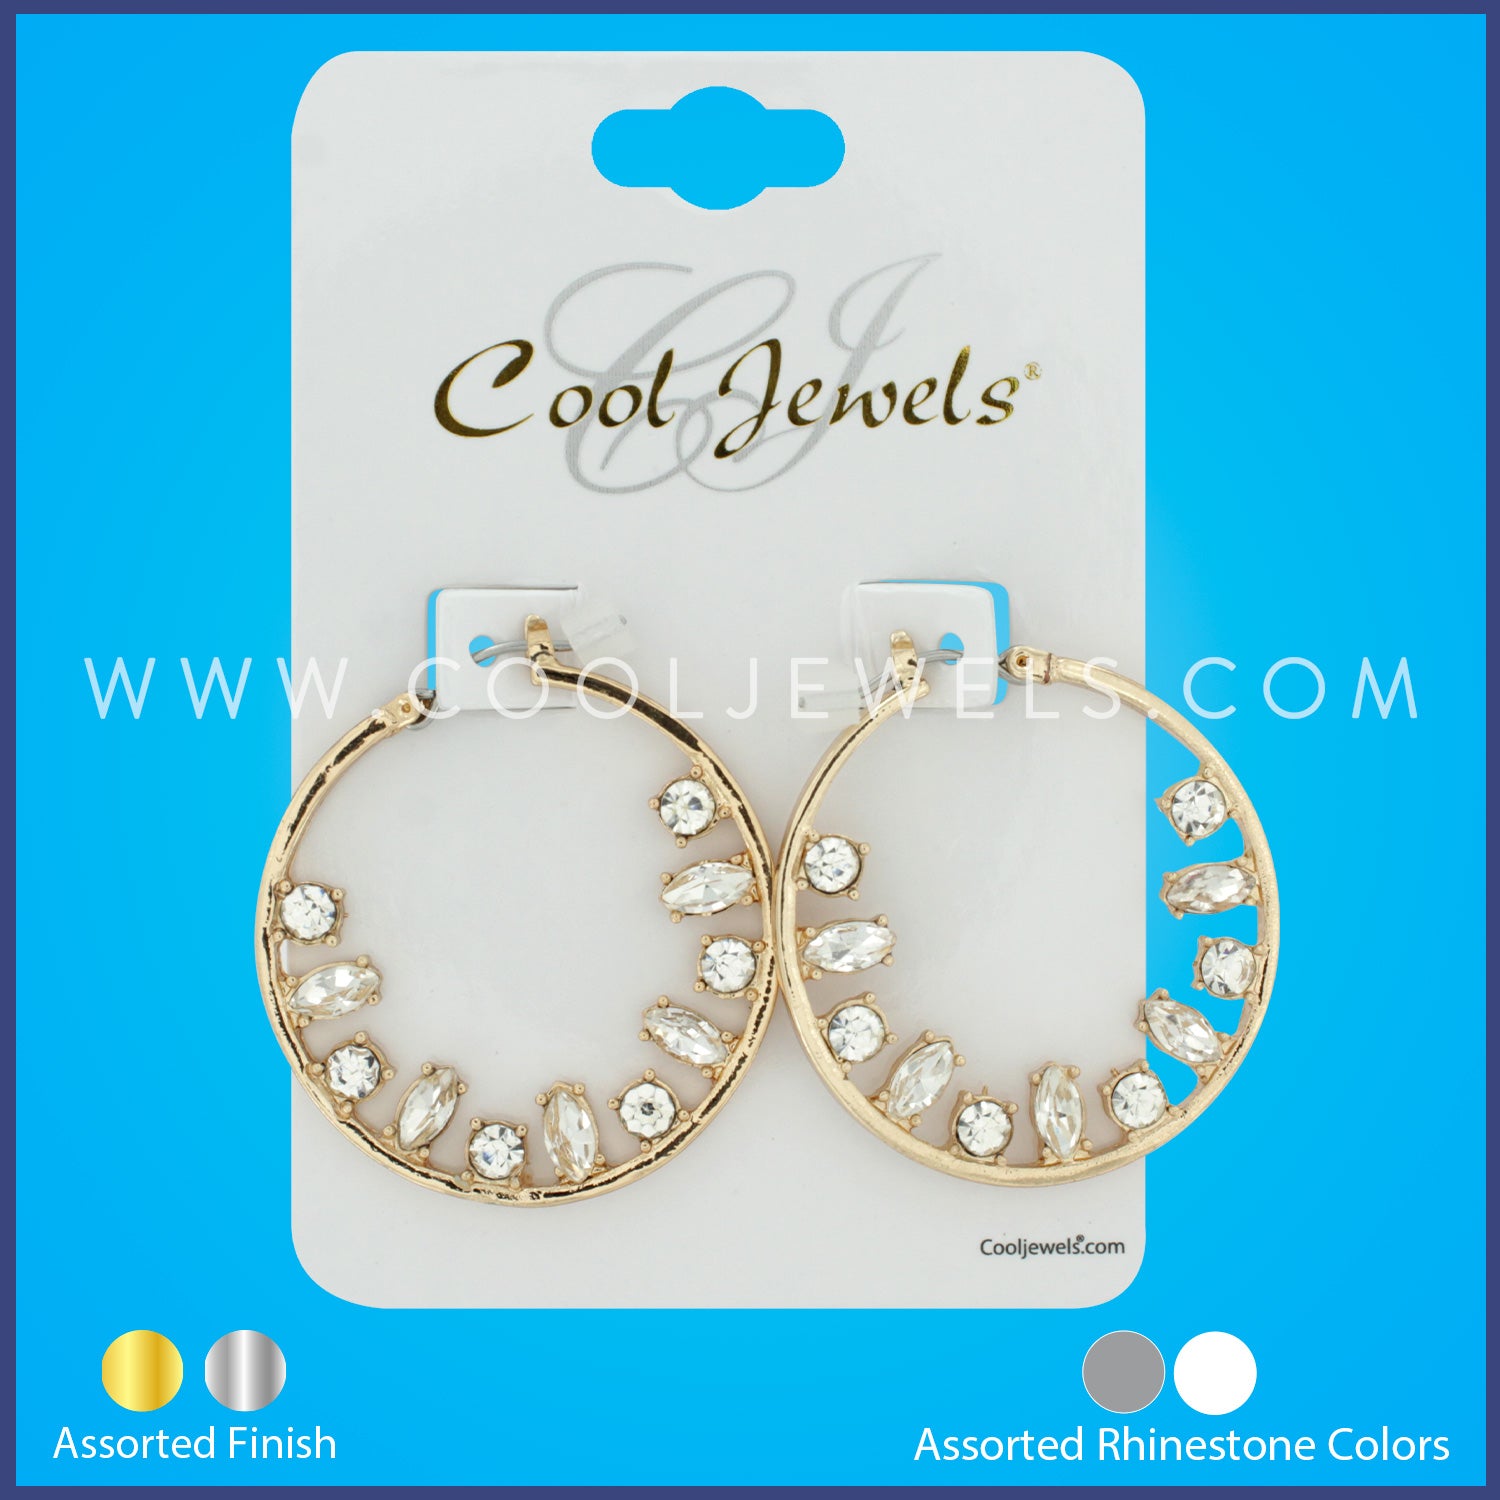 HOOP EARRING WITH FACETED STONES ASSORTED - CARDED